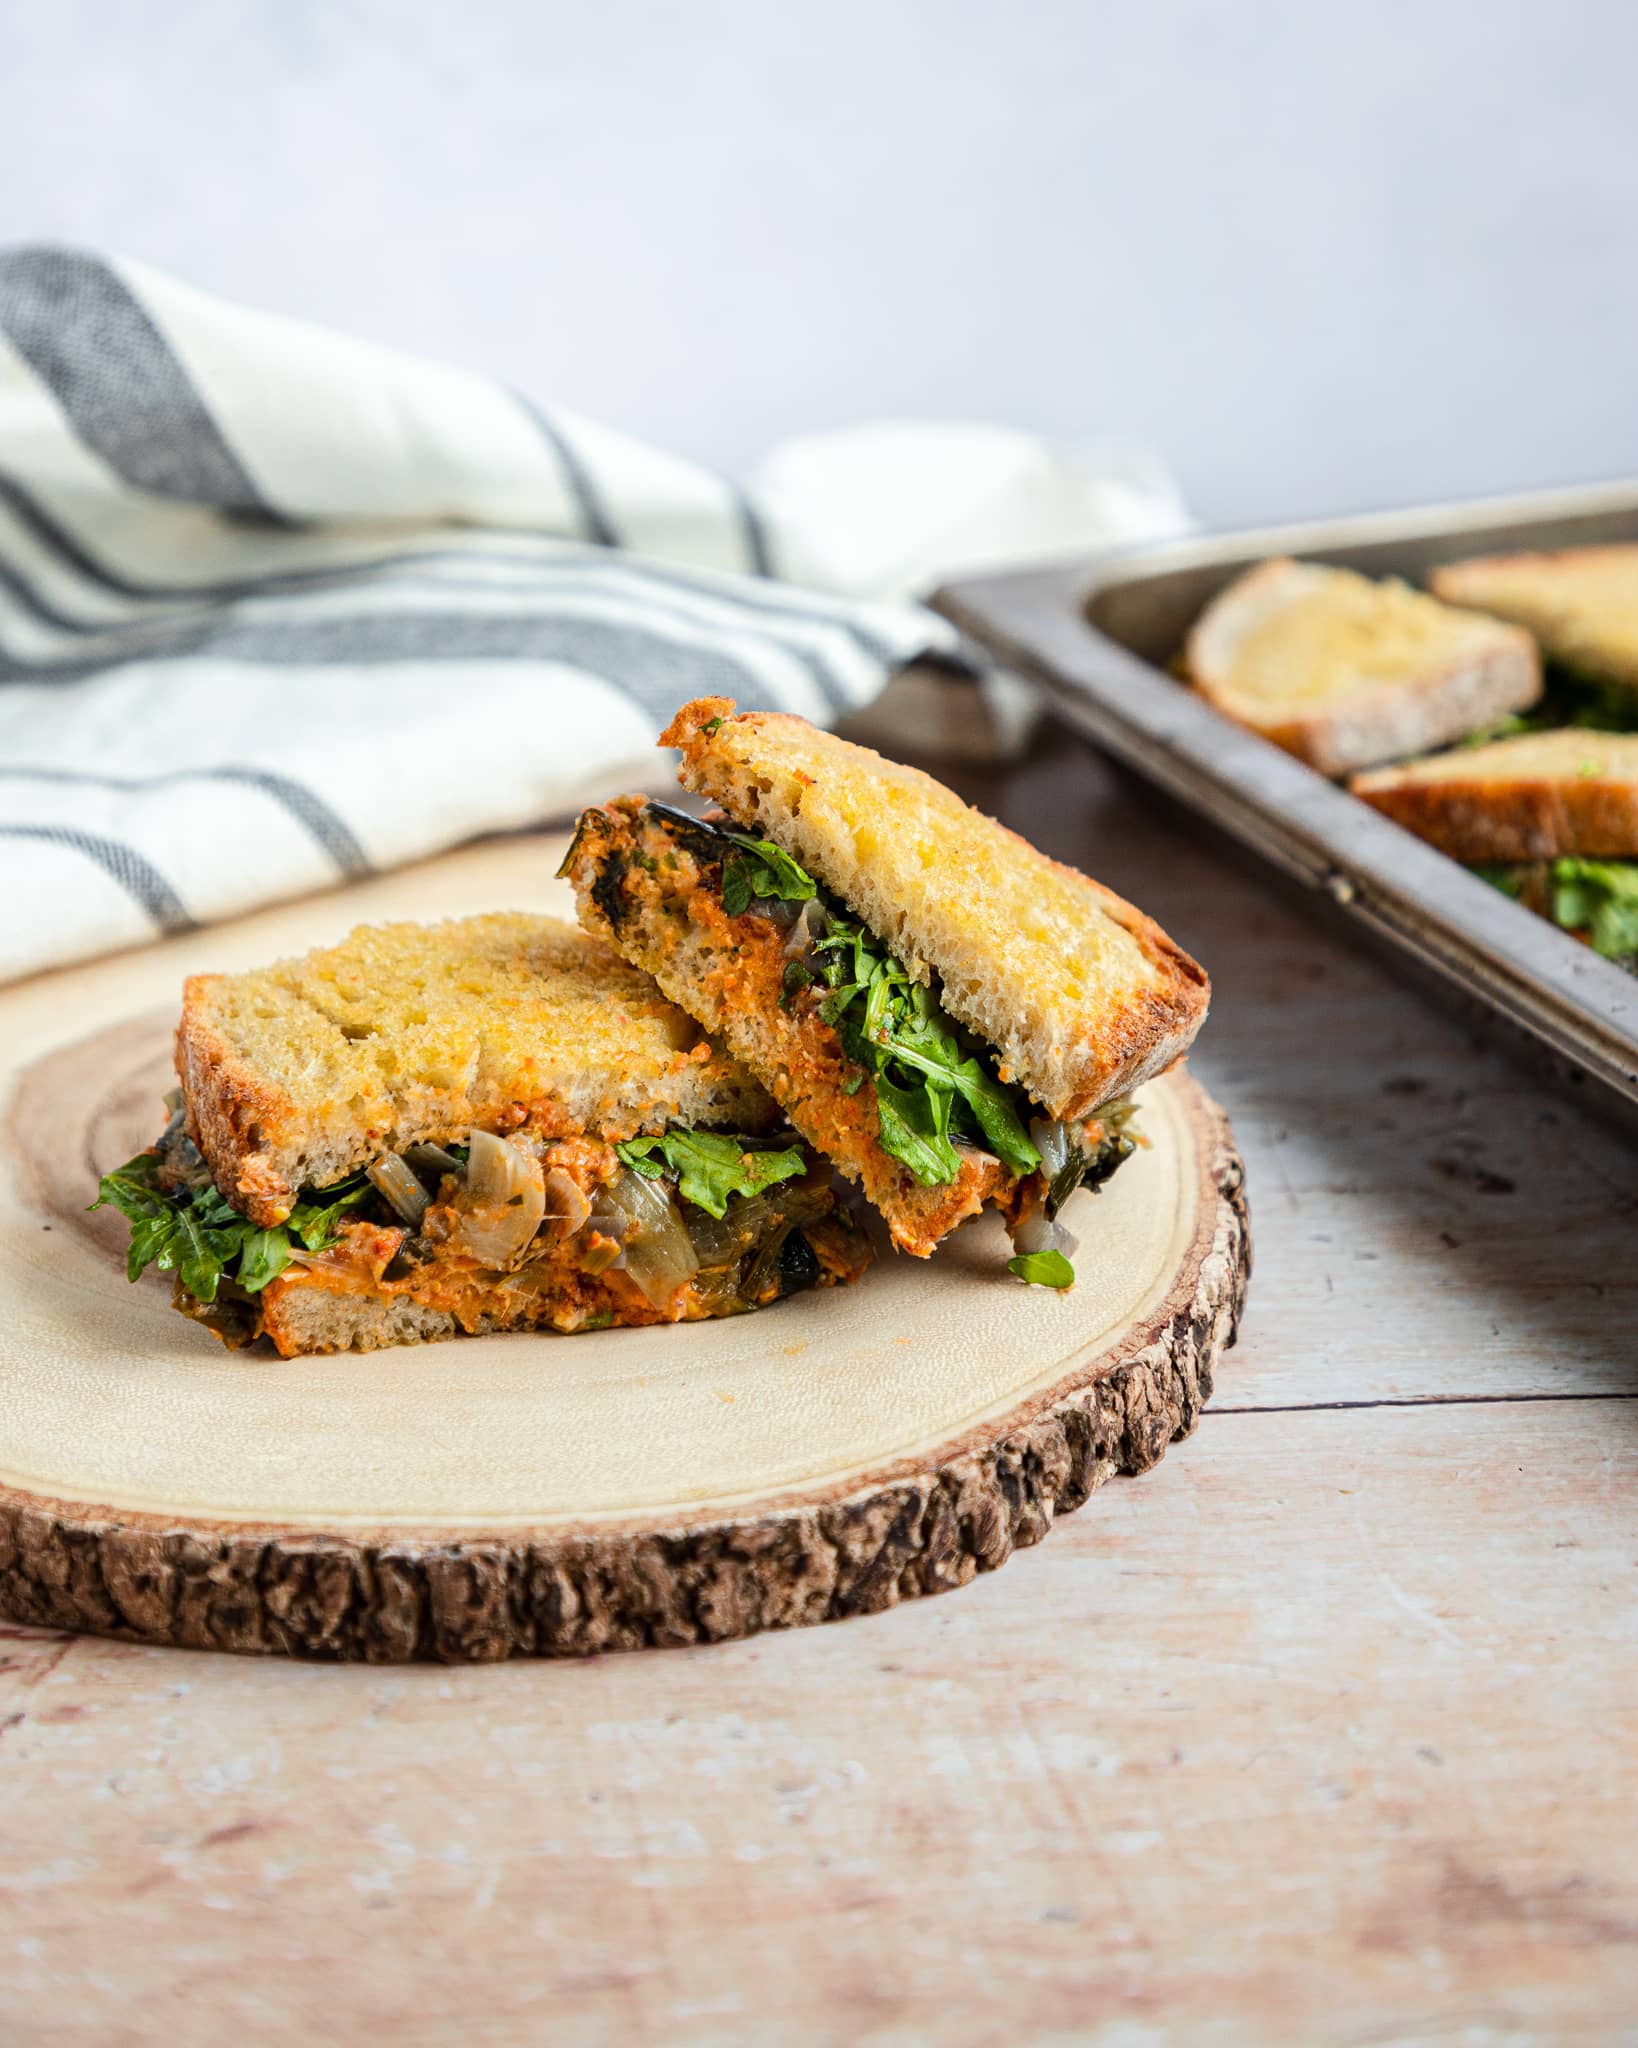 Decadent Caramelized Onion and Vegan Cheese Sandwich